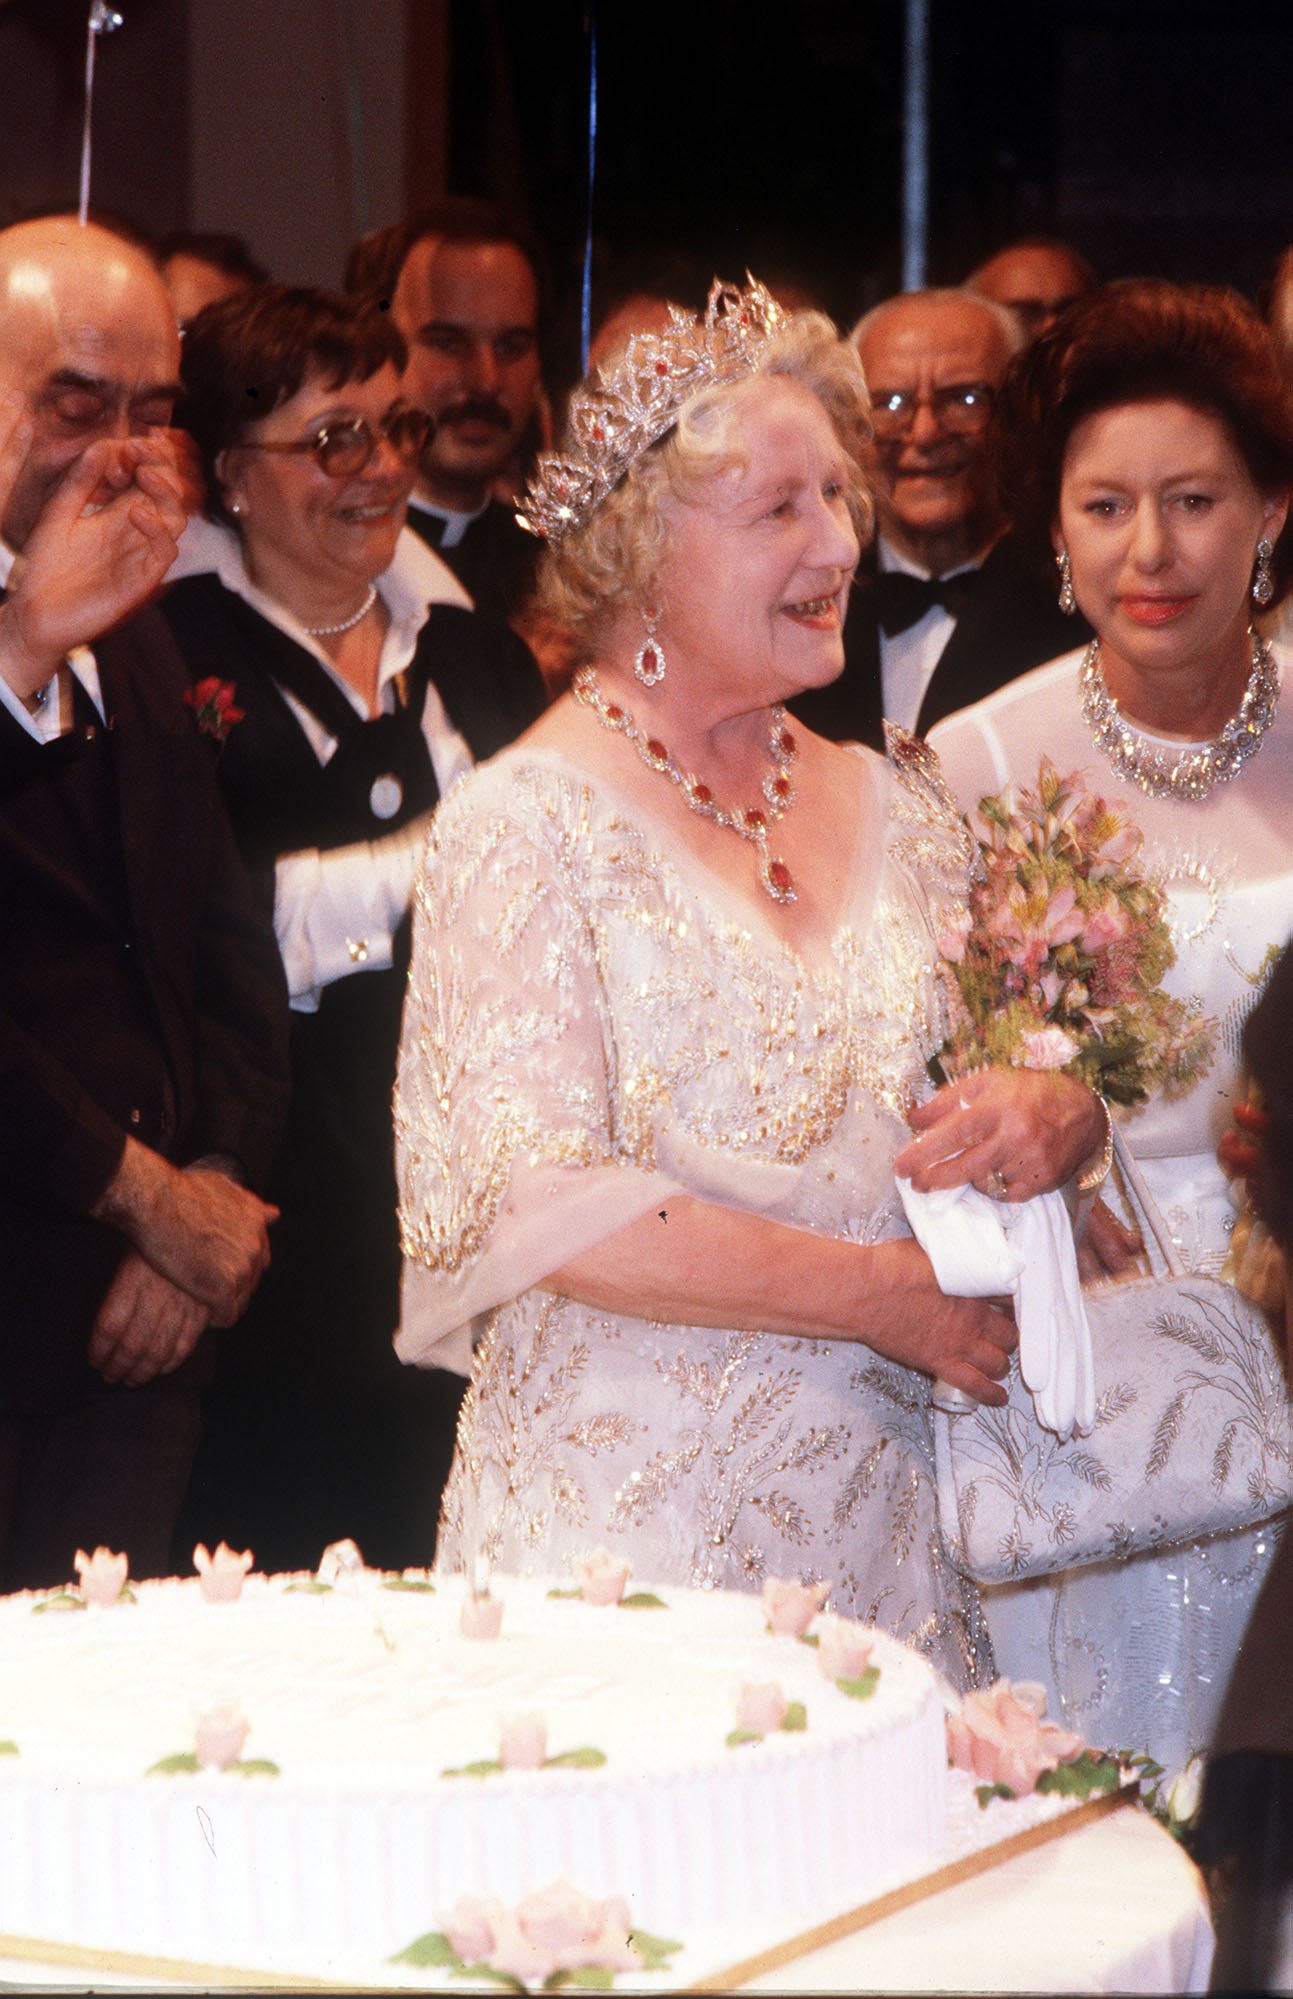 The Queen Mother and Princess Margaret at a cake-cutting ceremony on the Queen Mother's 80th Birthday at the Royal Opera House, Covent Garden on August 4, 1980 | Source: Getty Images